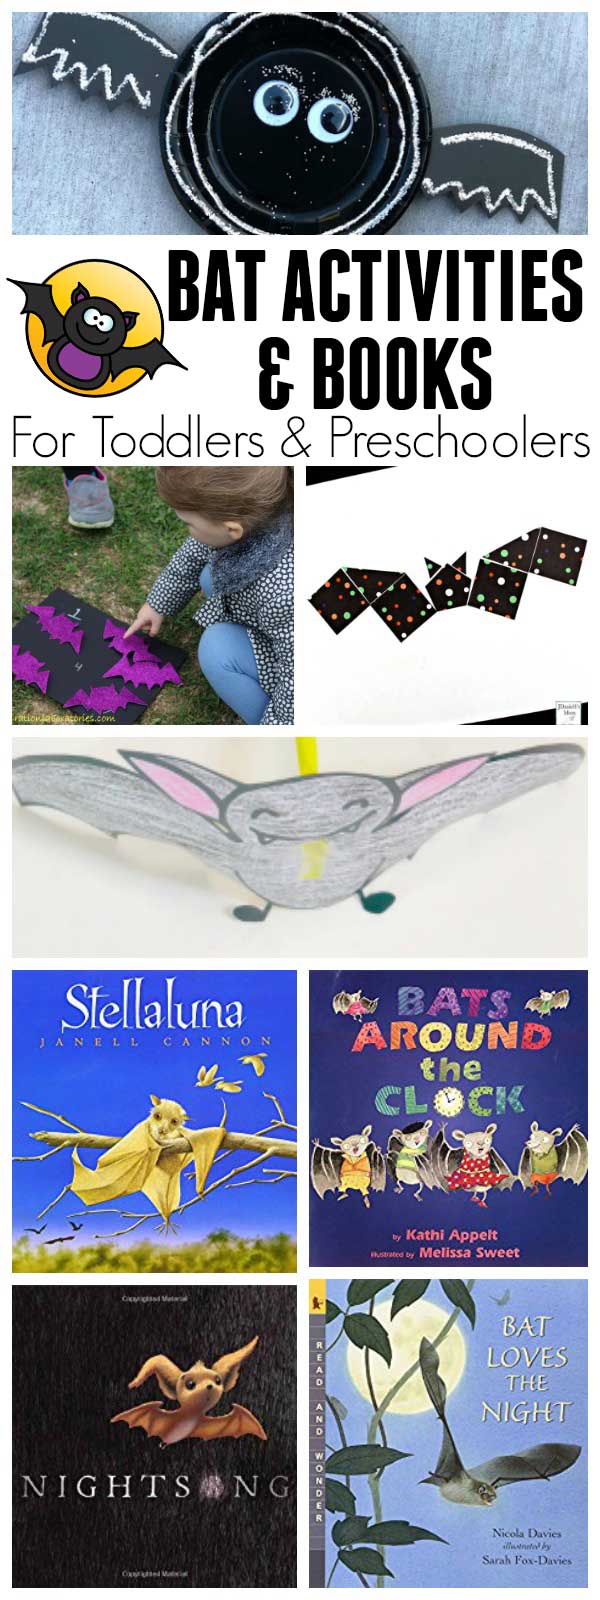 Week activity plan for bat or nocturnal animals with the featured book Stellaluna by Janell Cannon, aimed at Toddlers and Preschoolers